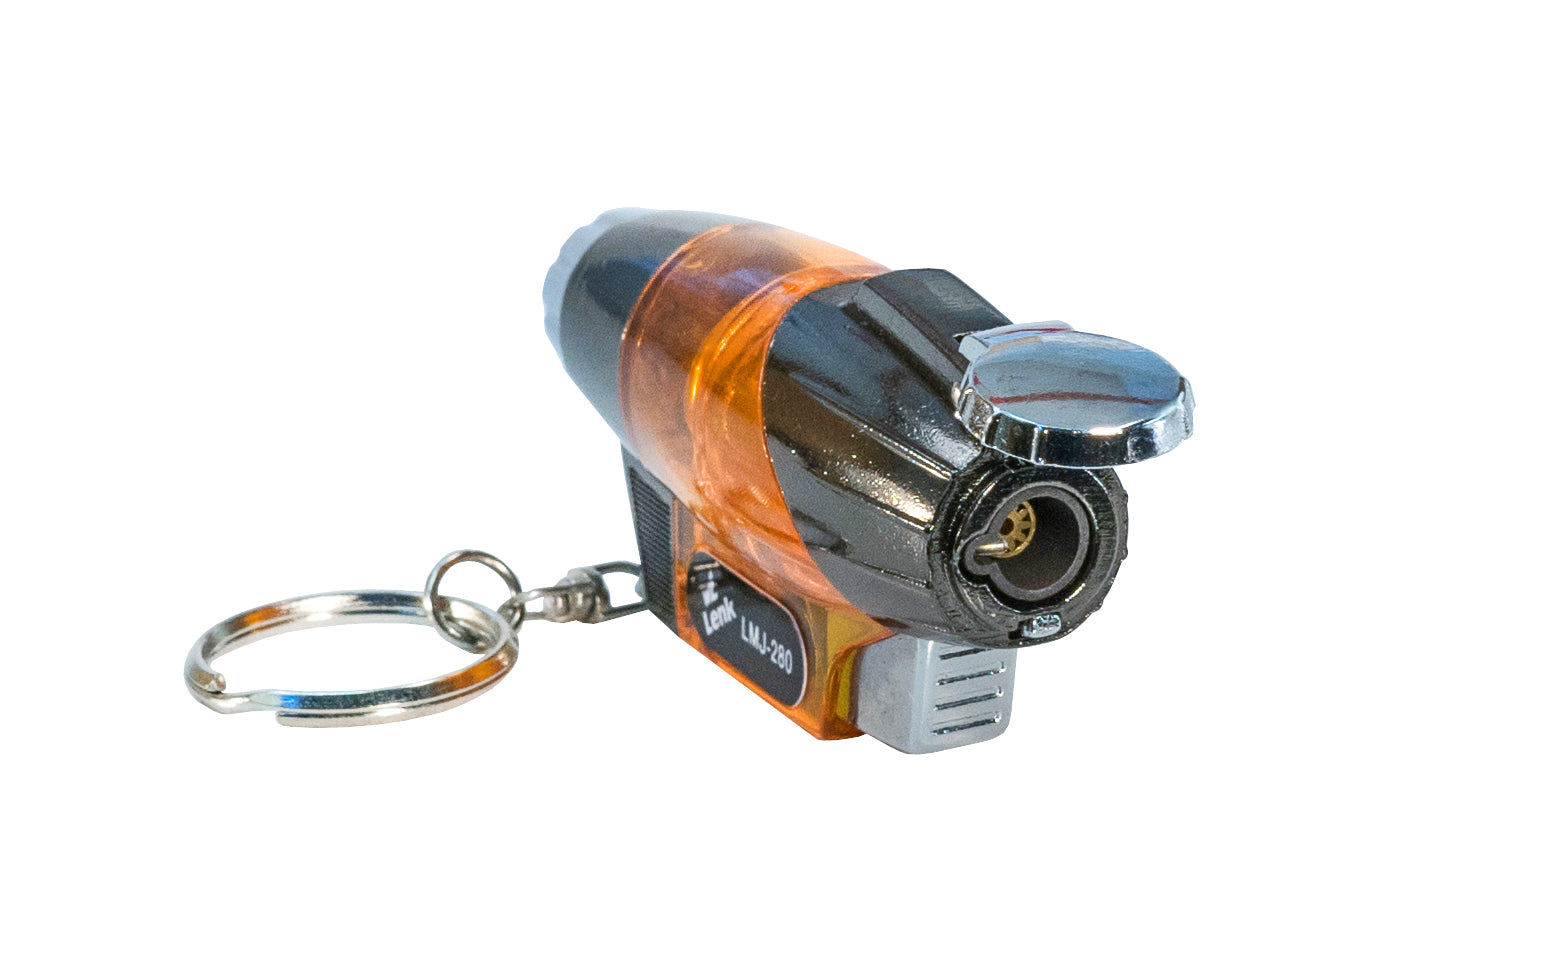 The Wall Lenk LMJ-280 Mini Turbo-Lite Torch is powered with Automatic Electronic Ignition System. Use turbo torch for light duty shop work, garage work, camping, survival kits, household repairs, first aid, hobby & crafts, heat shrink, outdoor activities, etc. Flame temperature - 2400° F - Blue flame - Keychain Torch - 048491400268